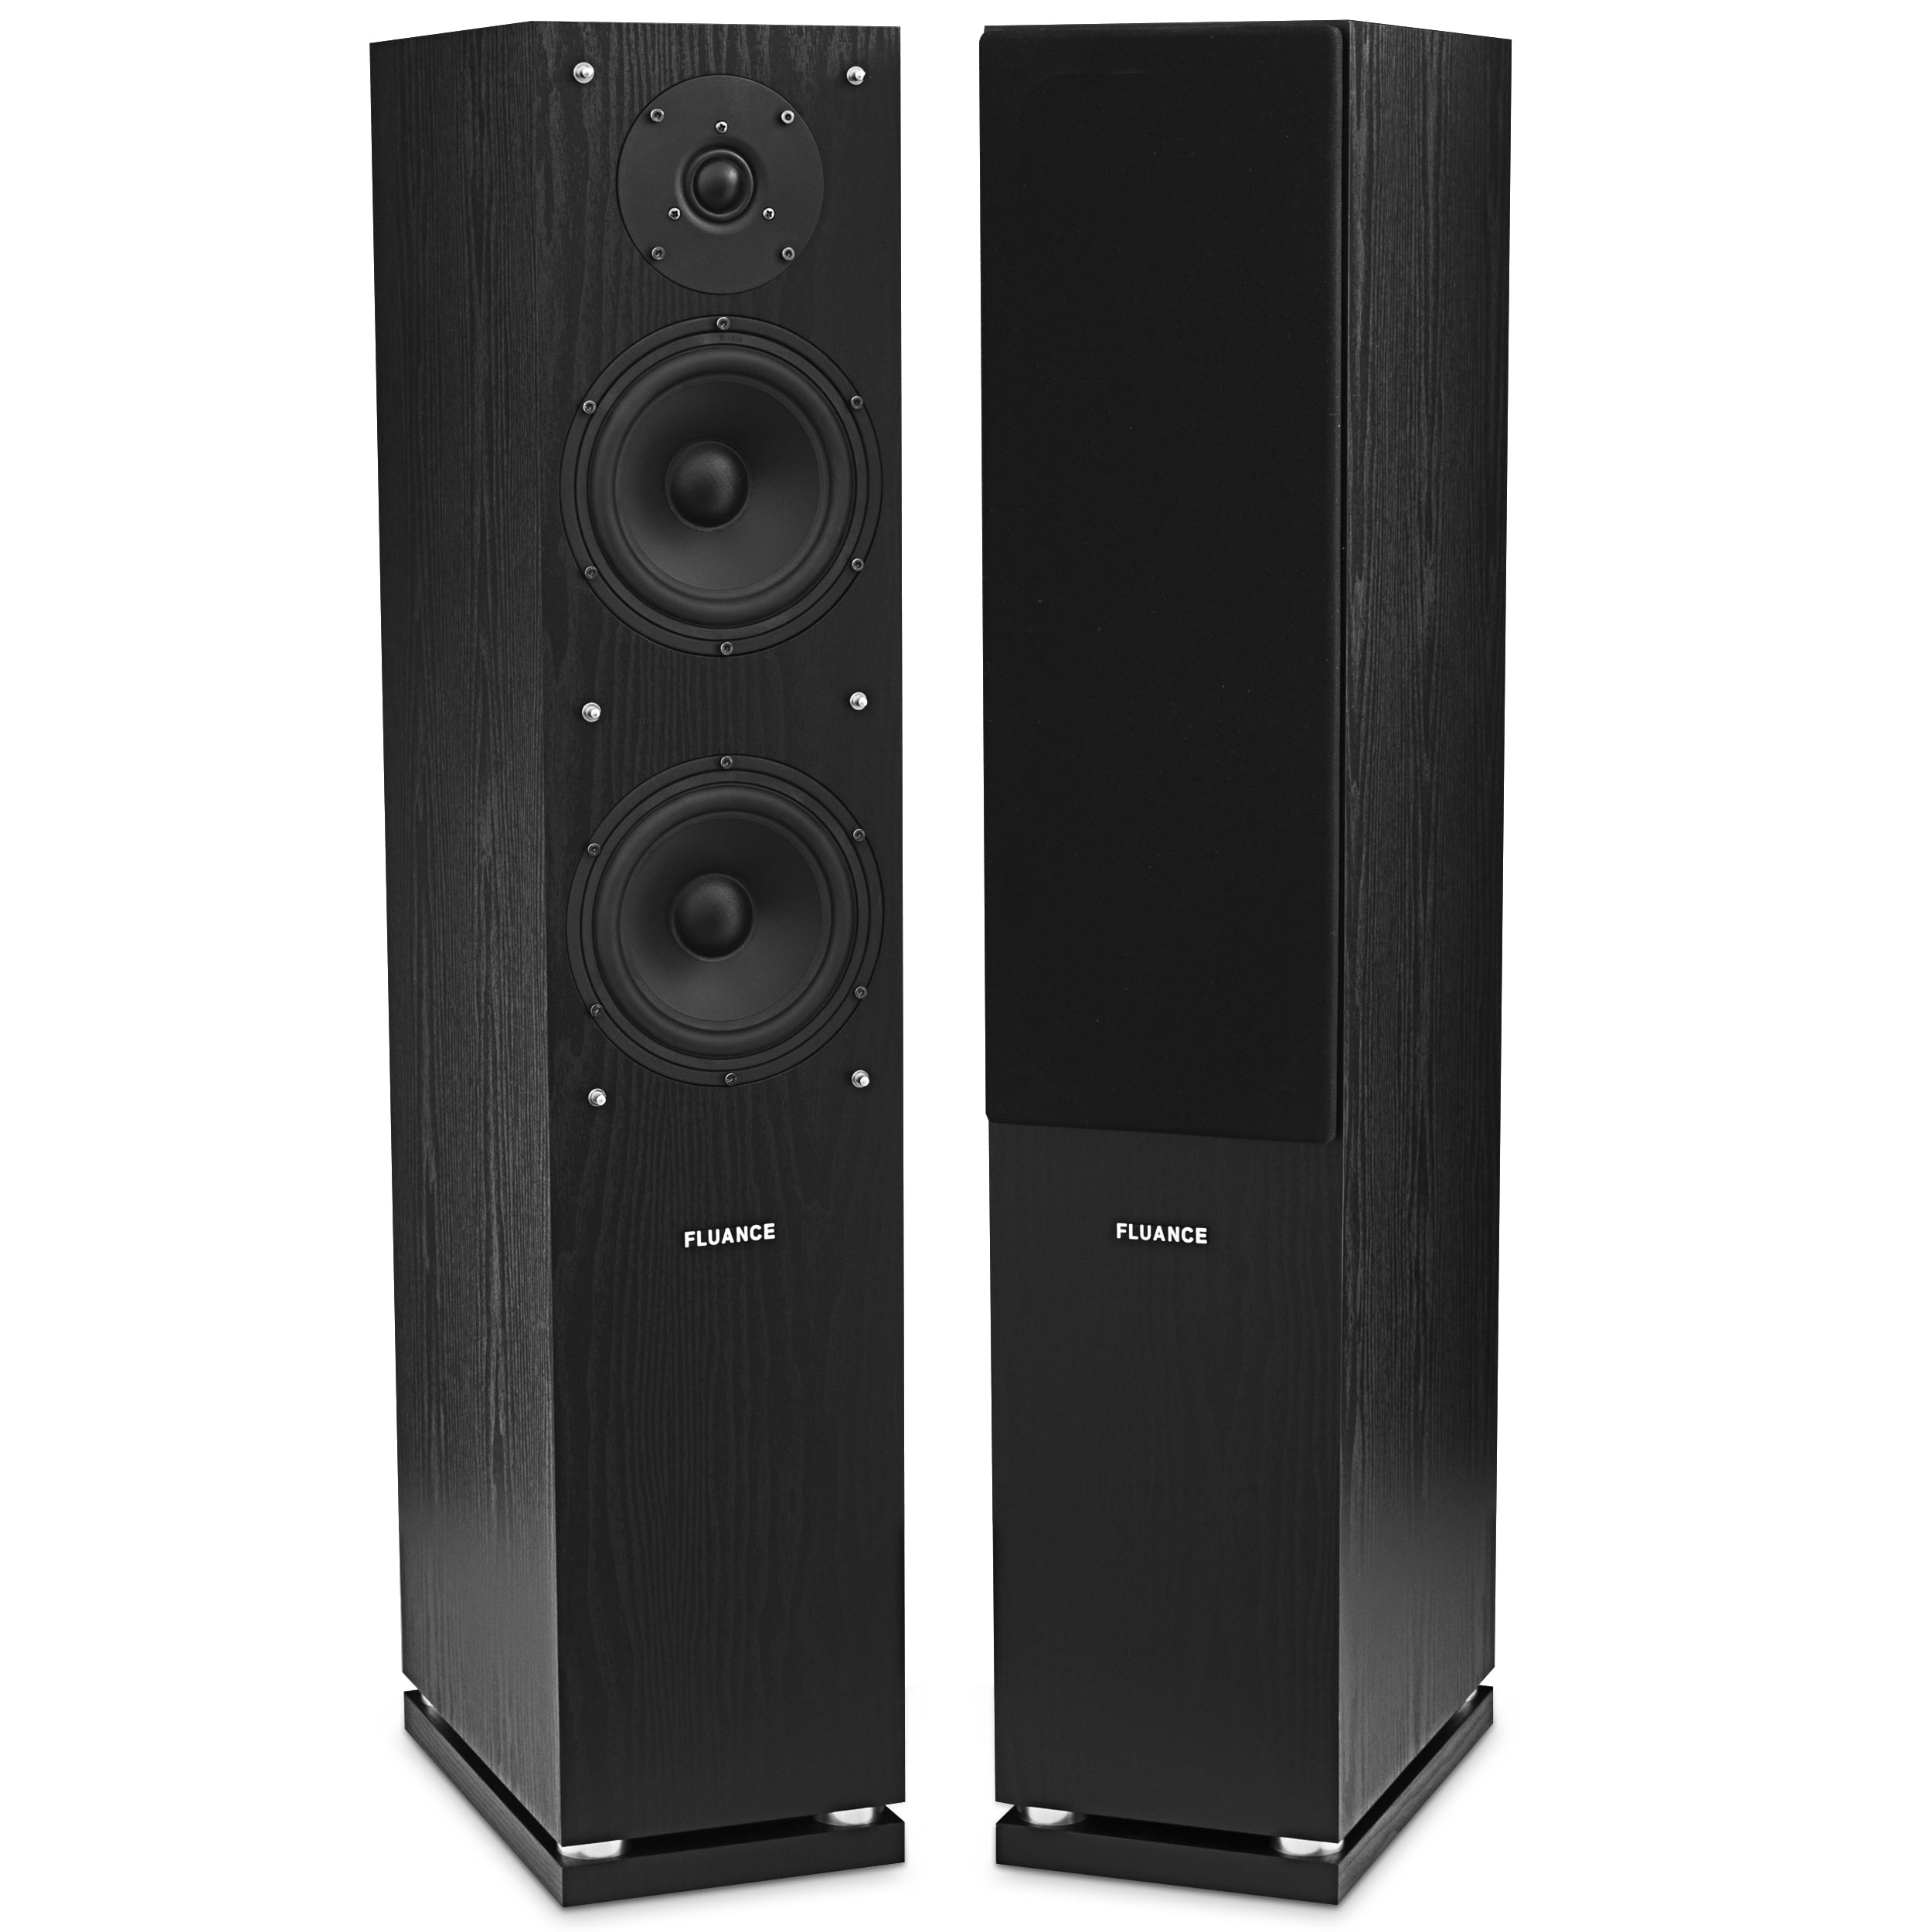 Rear Surround Speakers HF51BC Center Fluance Signature Series Compact Surround Sound Home Theater 5.1 Channel Speaker System Including Two-Way Bookshelf and DB12 Subwoofer Black Ash